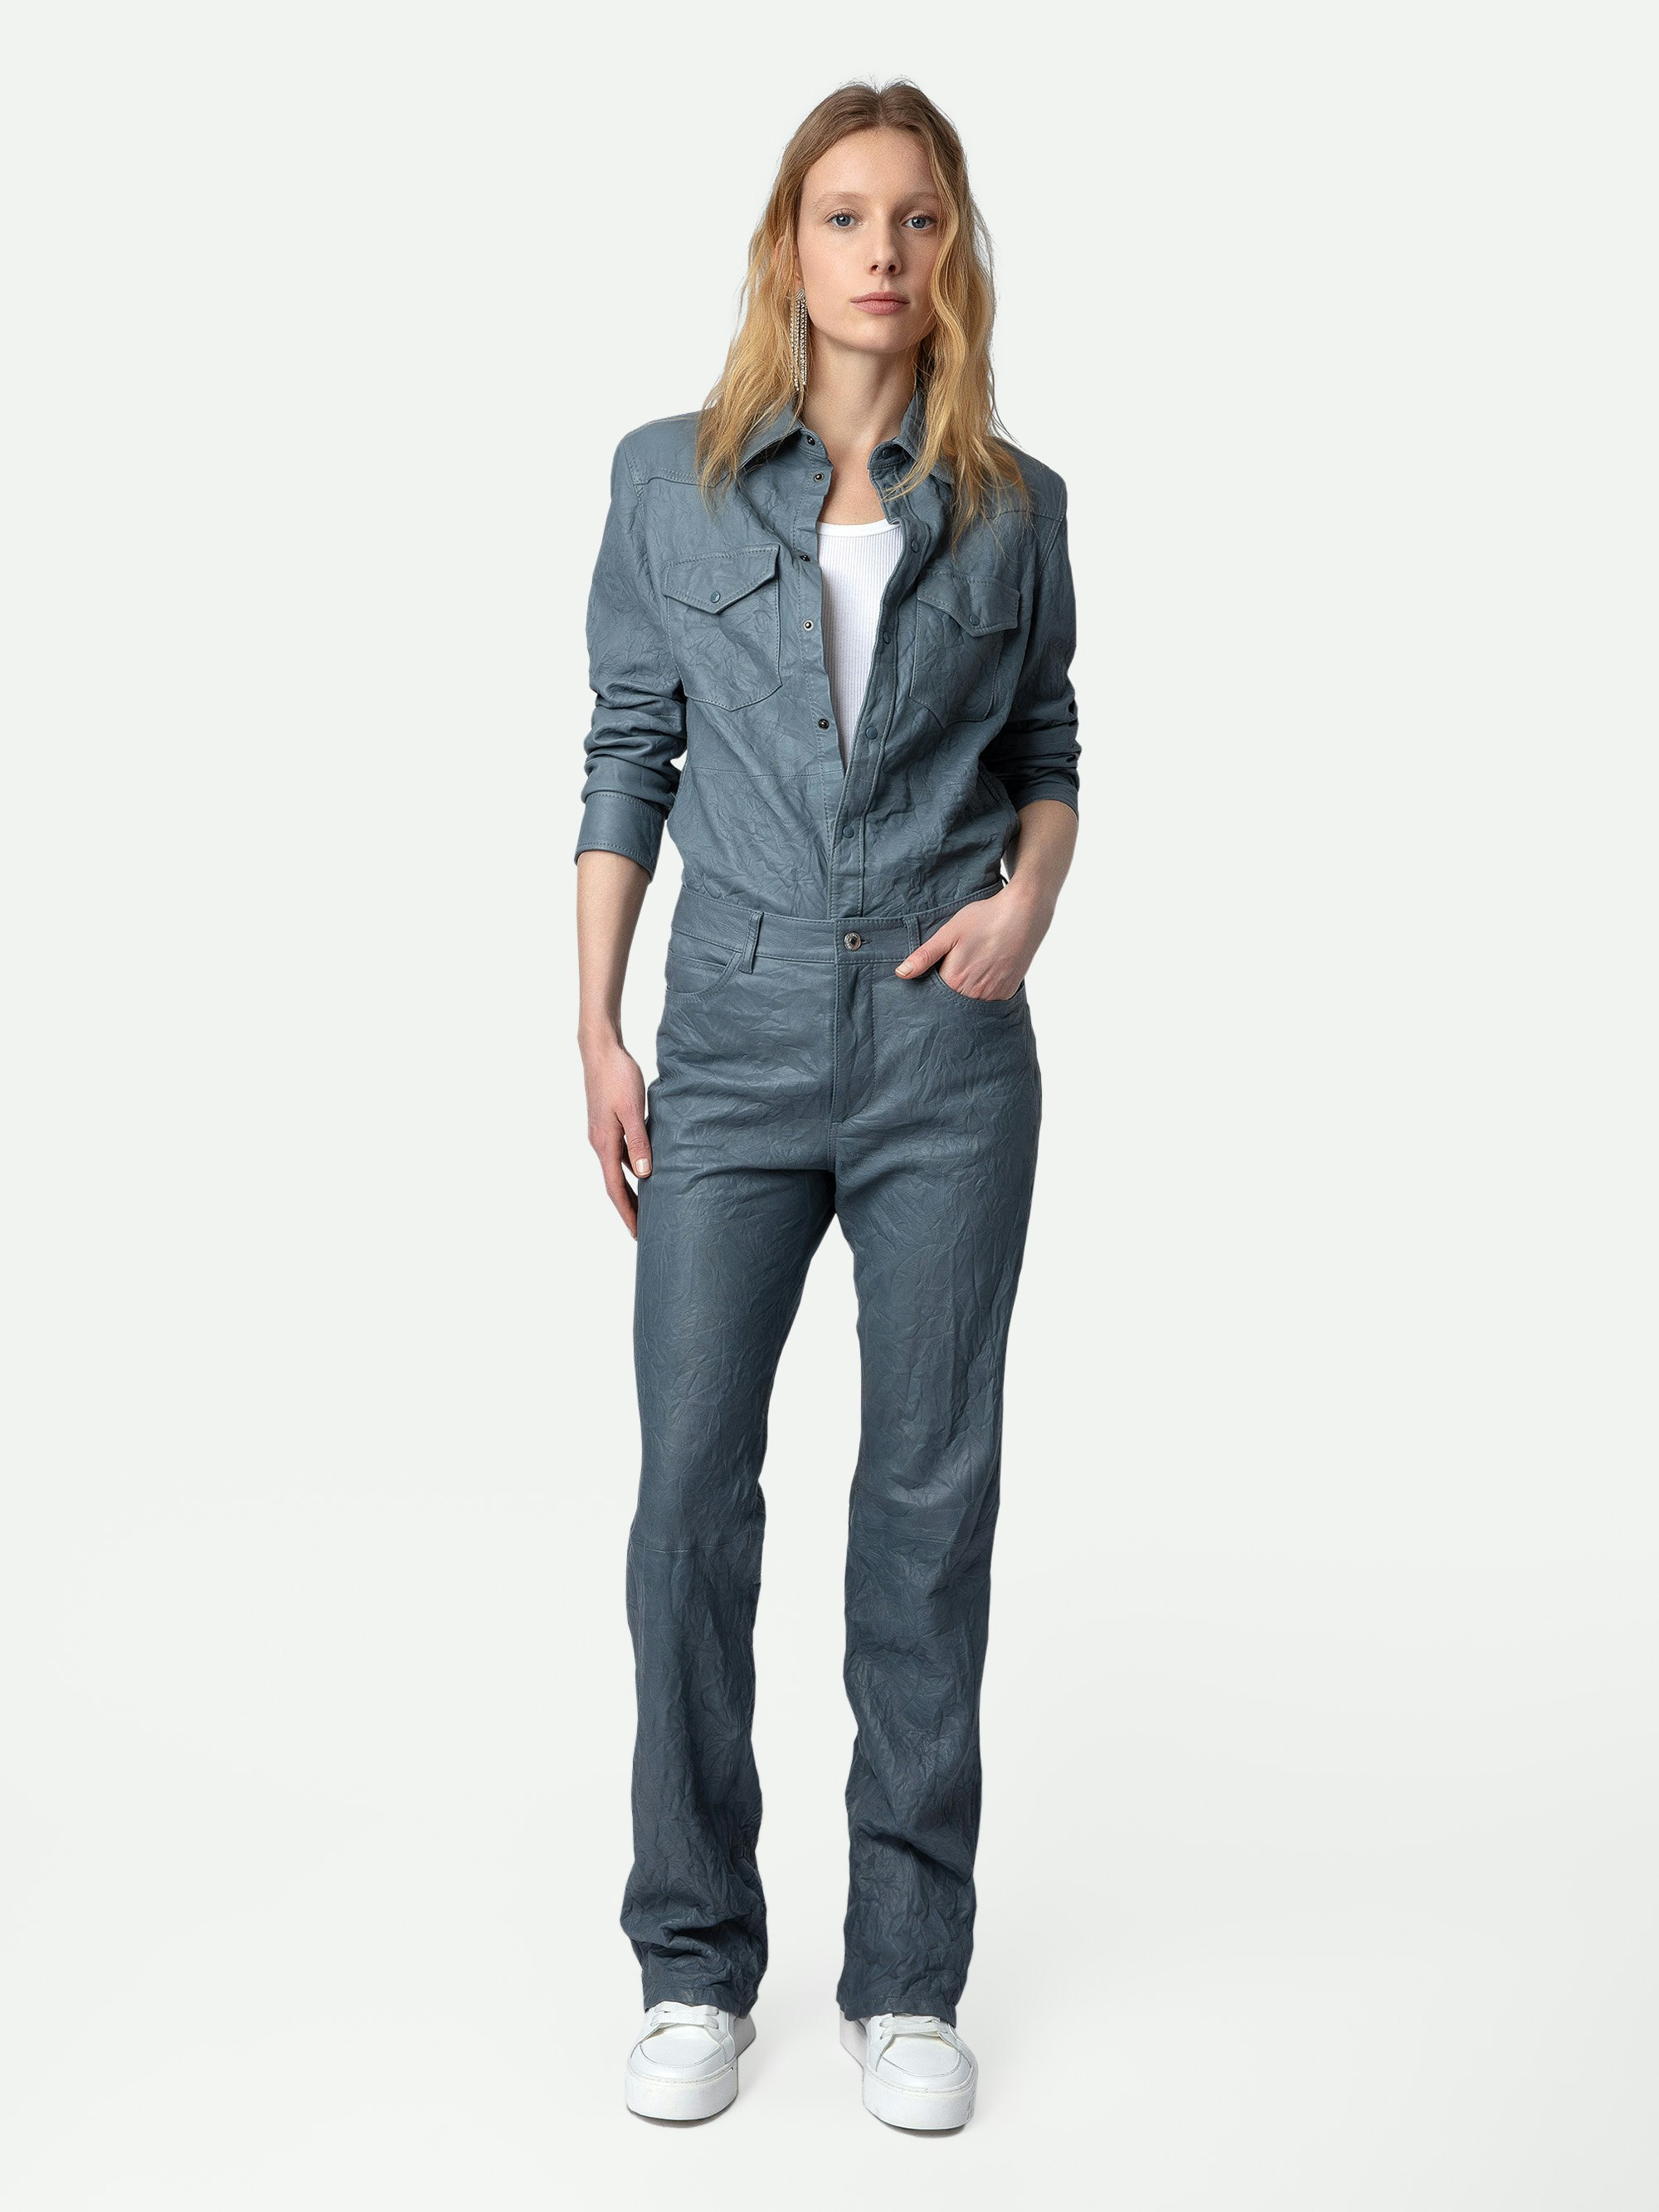 Pistol Crinkled Leather Trousers - Sky blue flared tailored trousers in crinkled leather with pockets.